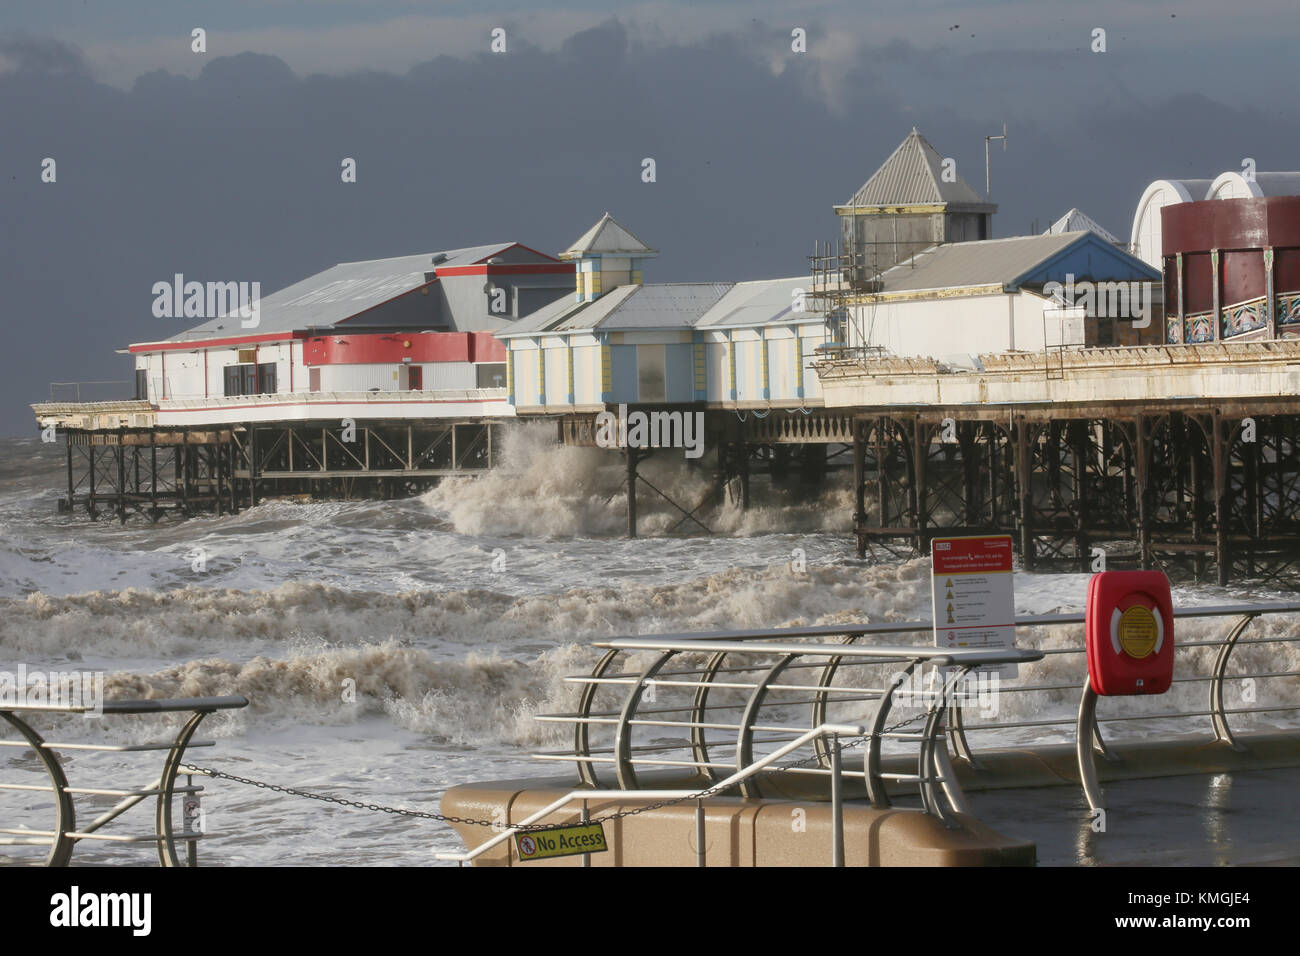 Blackpool, UK. 07th Dec, 2017. The beach access is closed due to a high tide in Blackpool, Lancashire,7th December, 2017 (C)Barbara Cook/Alamy Live News Credit: Barbara Cook/Alamy Live News Stock Photo